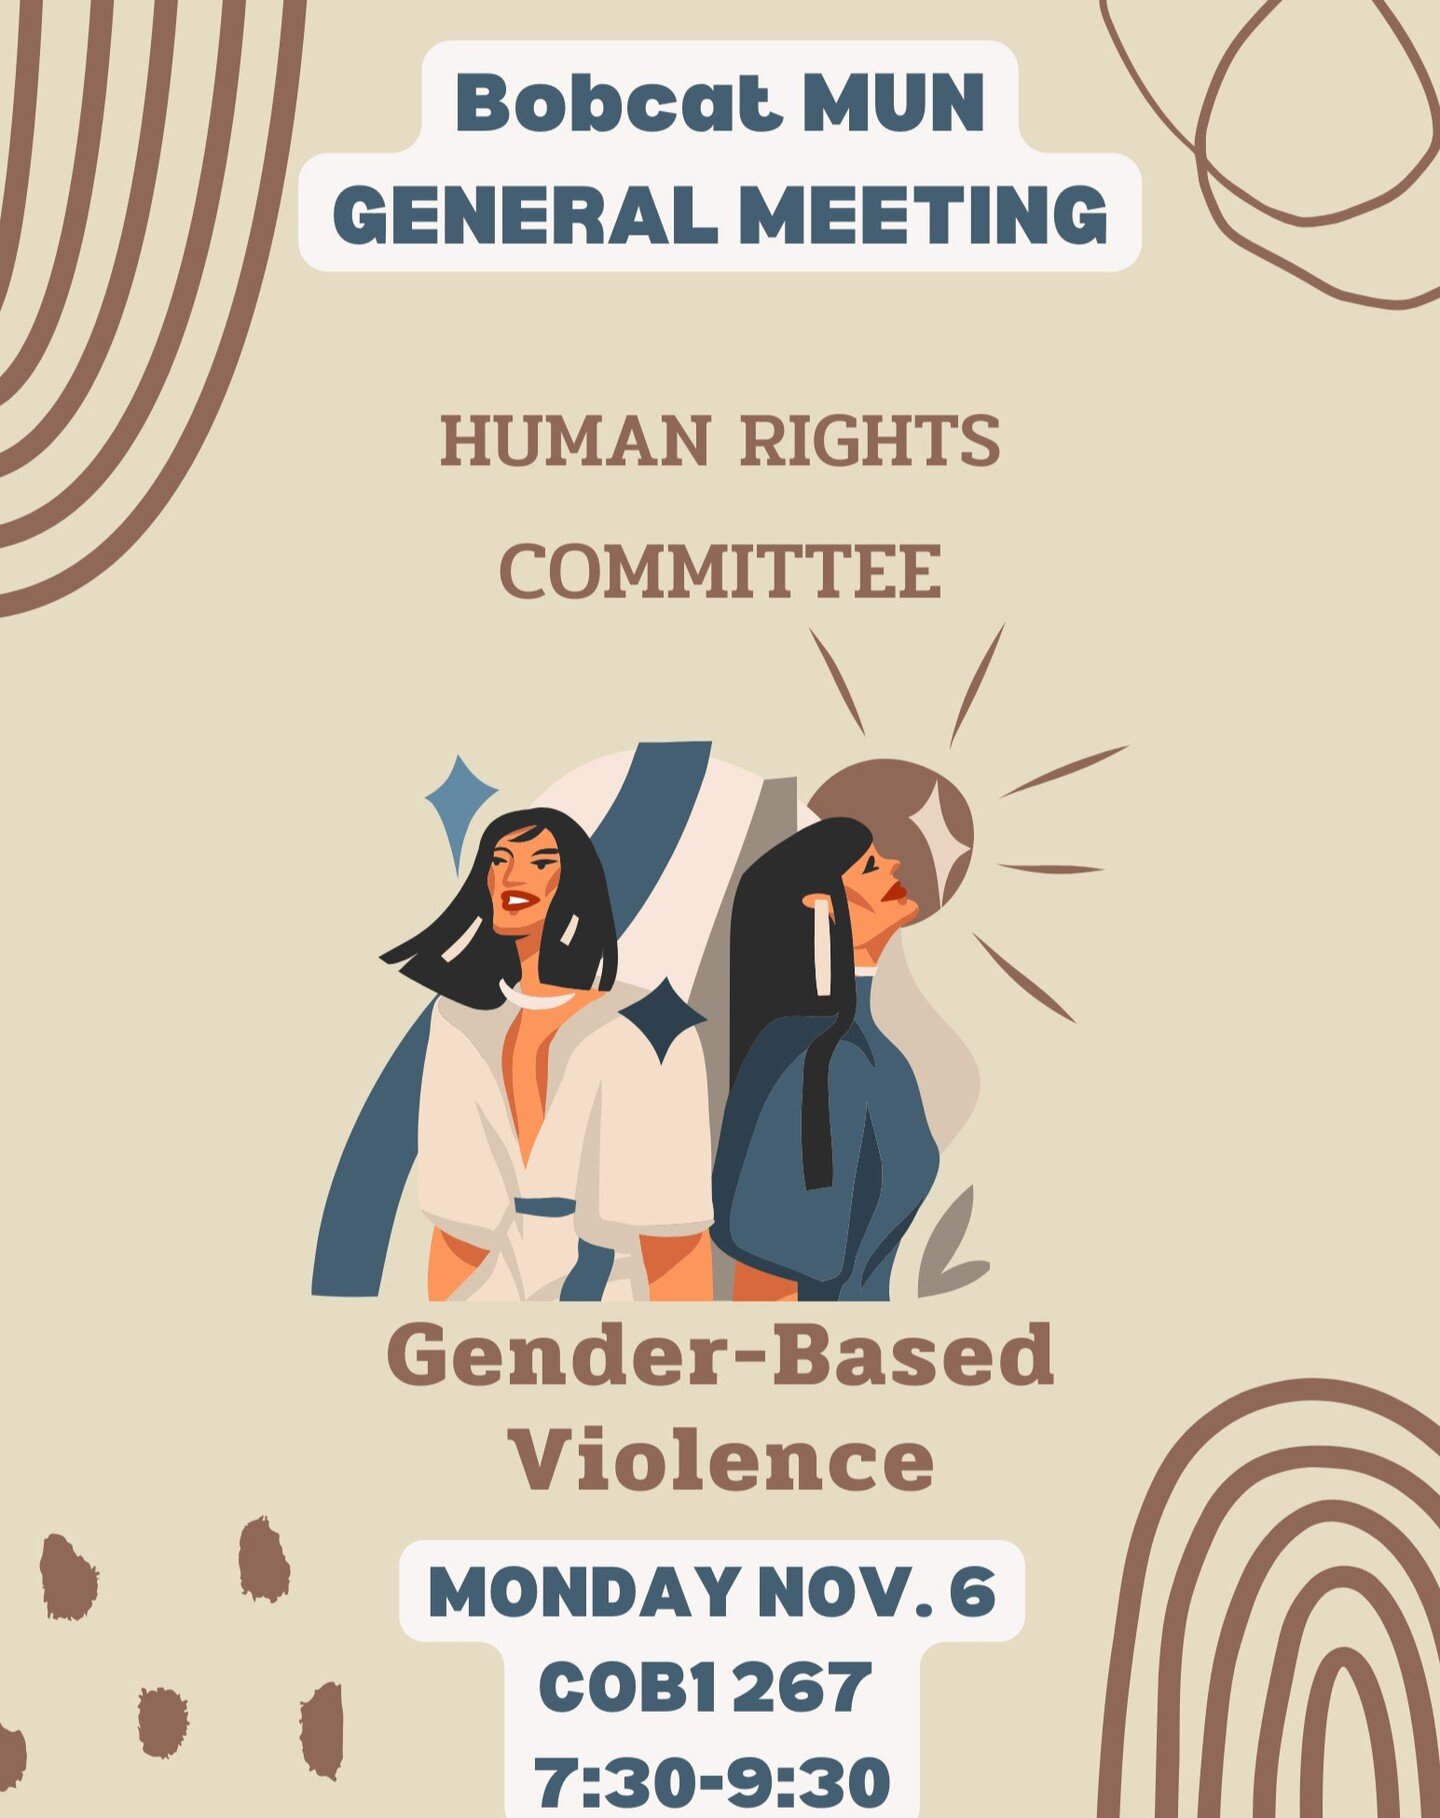 Happy MUN-day everyone! Today we will be continuing our current GA committee on human rights! We will be debating gender-based violence and the establishment of a gender-neutral definition. As always, people new to Model UN are always welcome! We hop